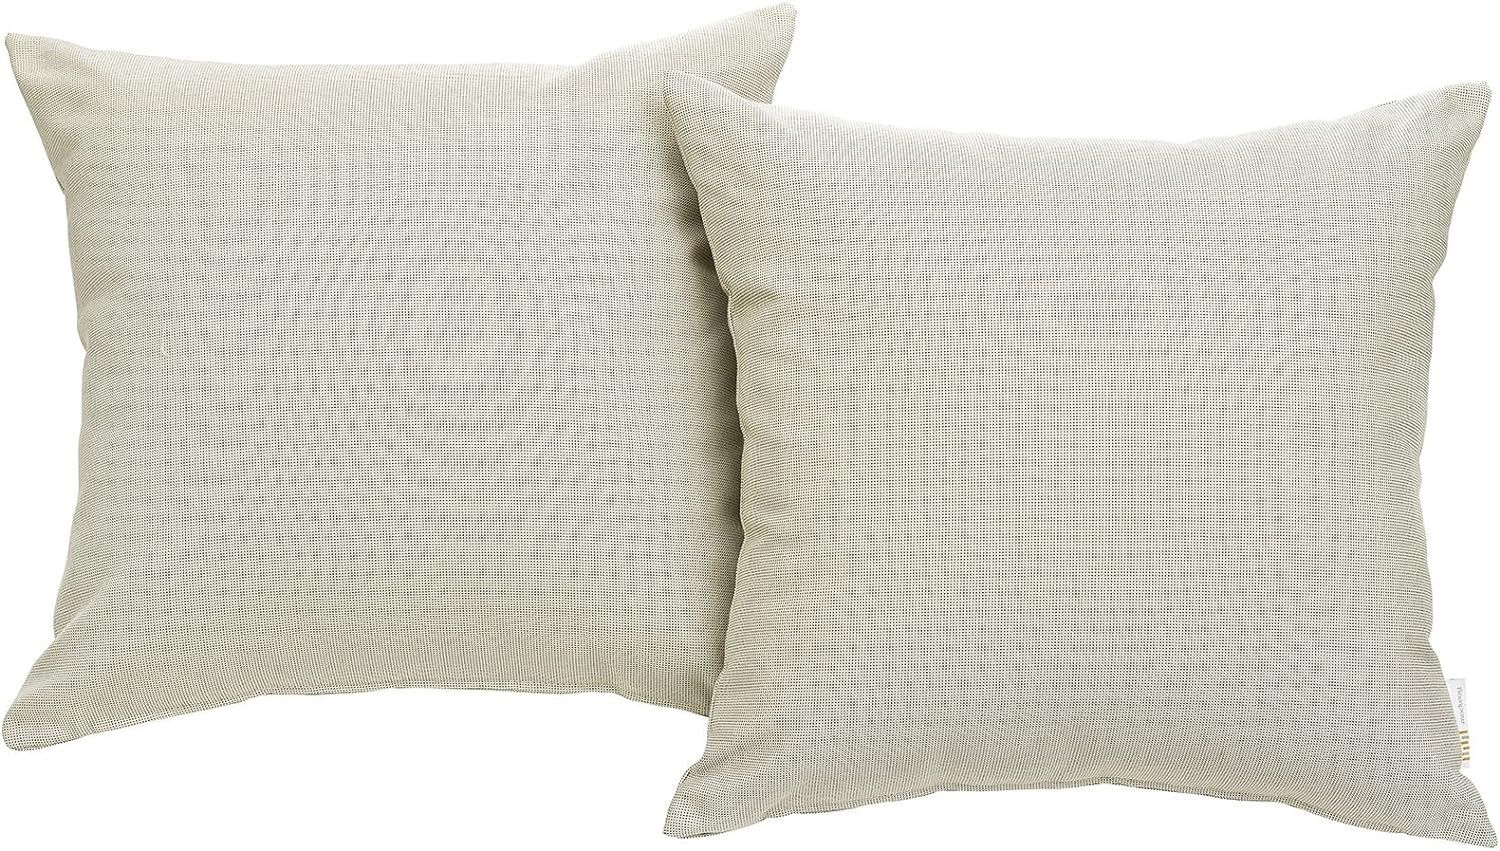 Modway Convene Outdoor Patio All-Weather Pillow in Beige - Set of 2 | Amazon (US)